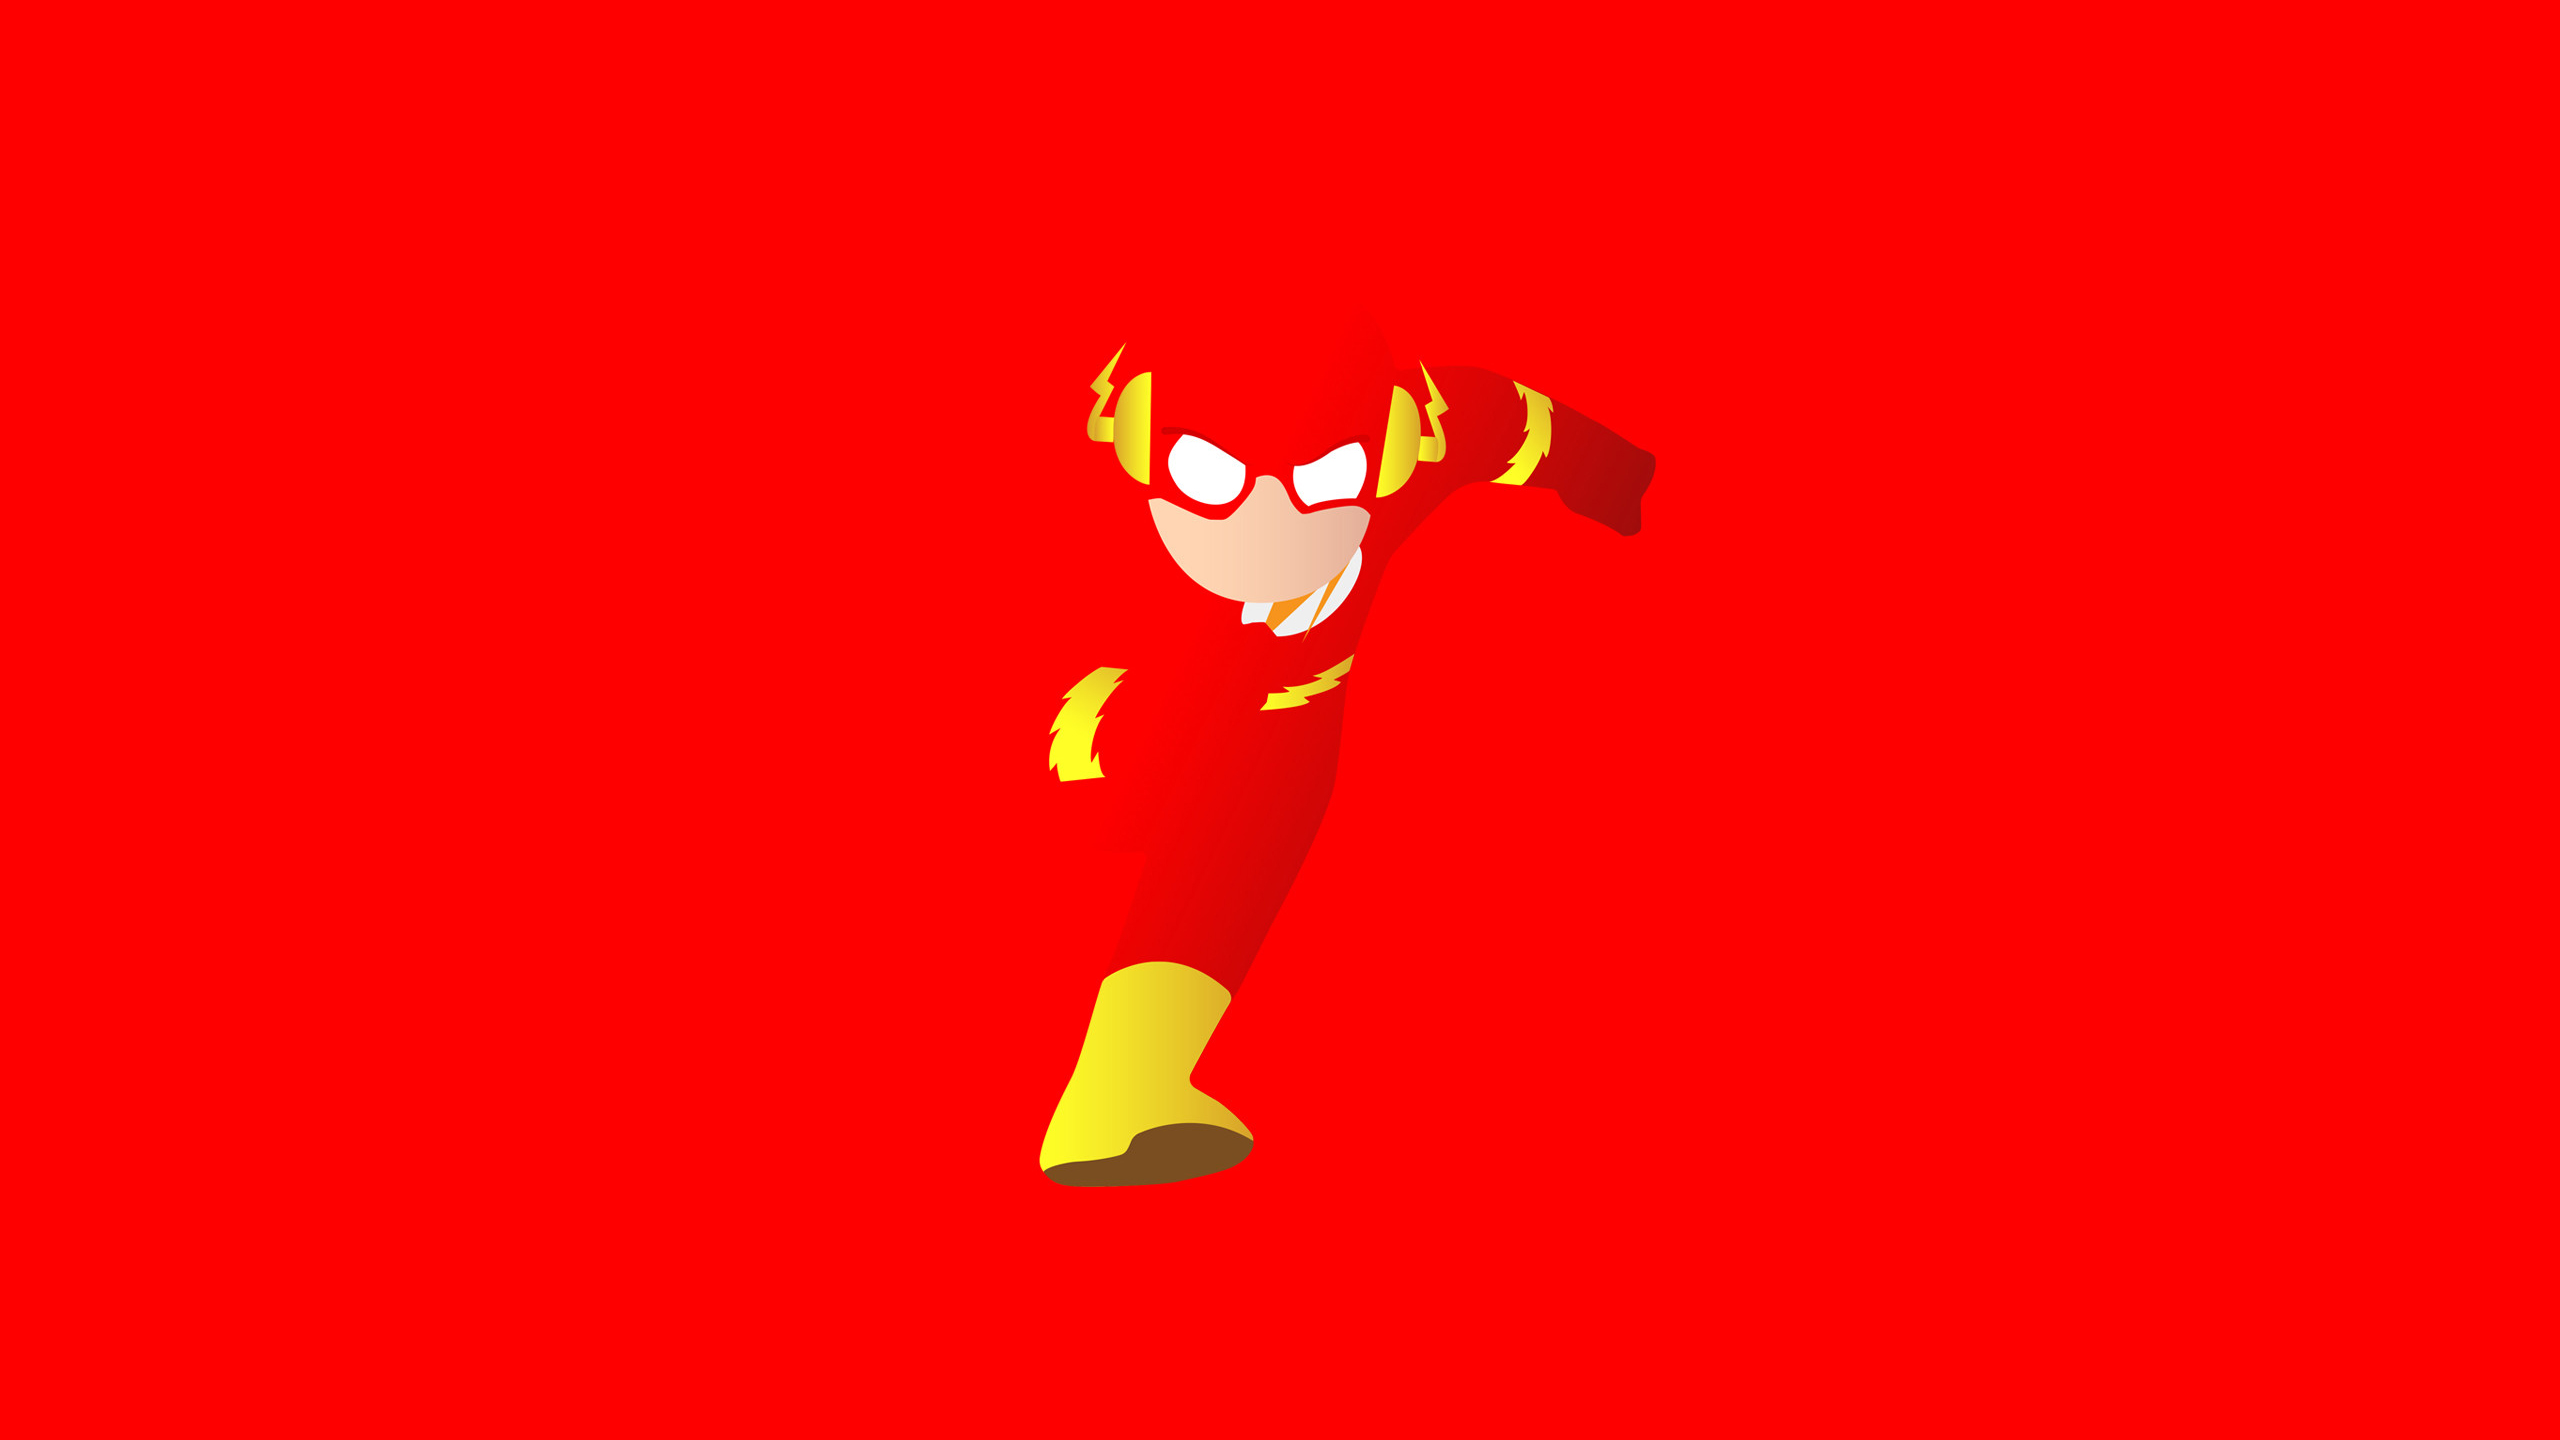 The Flash Minimal Wallpapers